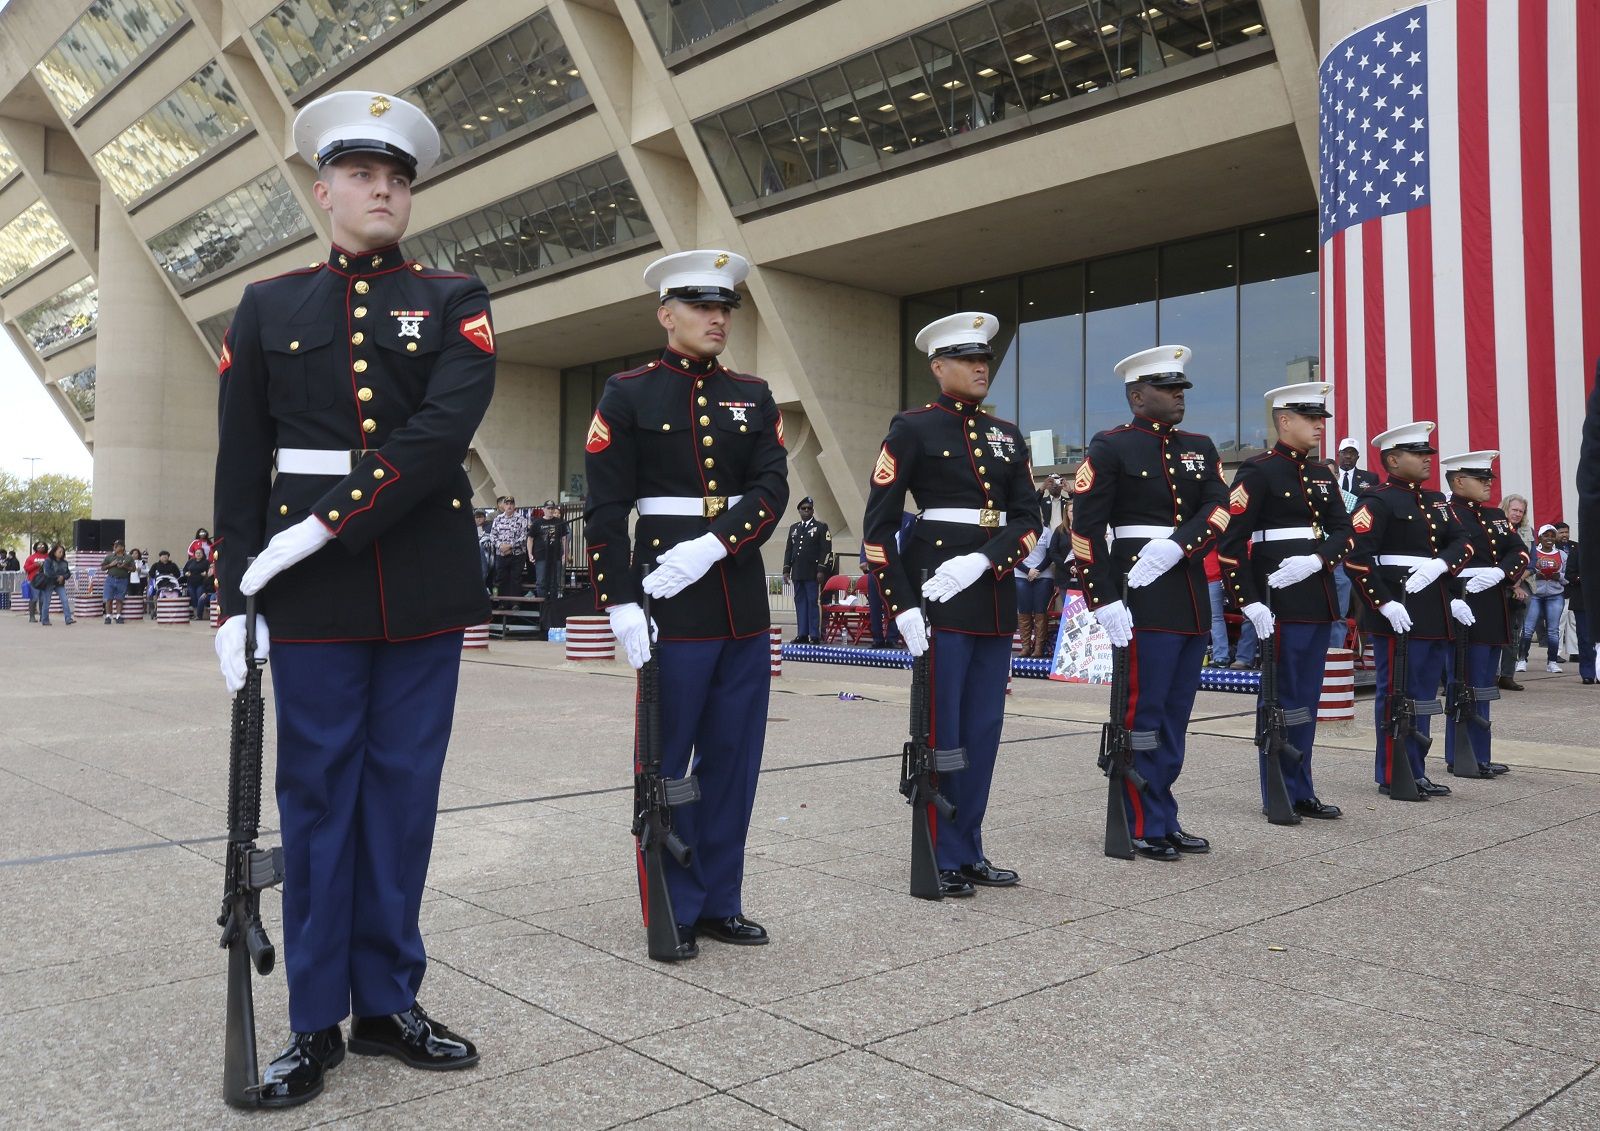 U.S. Marines stand at attention before a Veterans Day parade in Dallas, Friday, Nov. 10, 2017. (AP Photo/LM Otero)